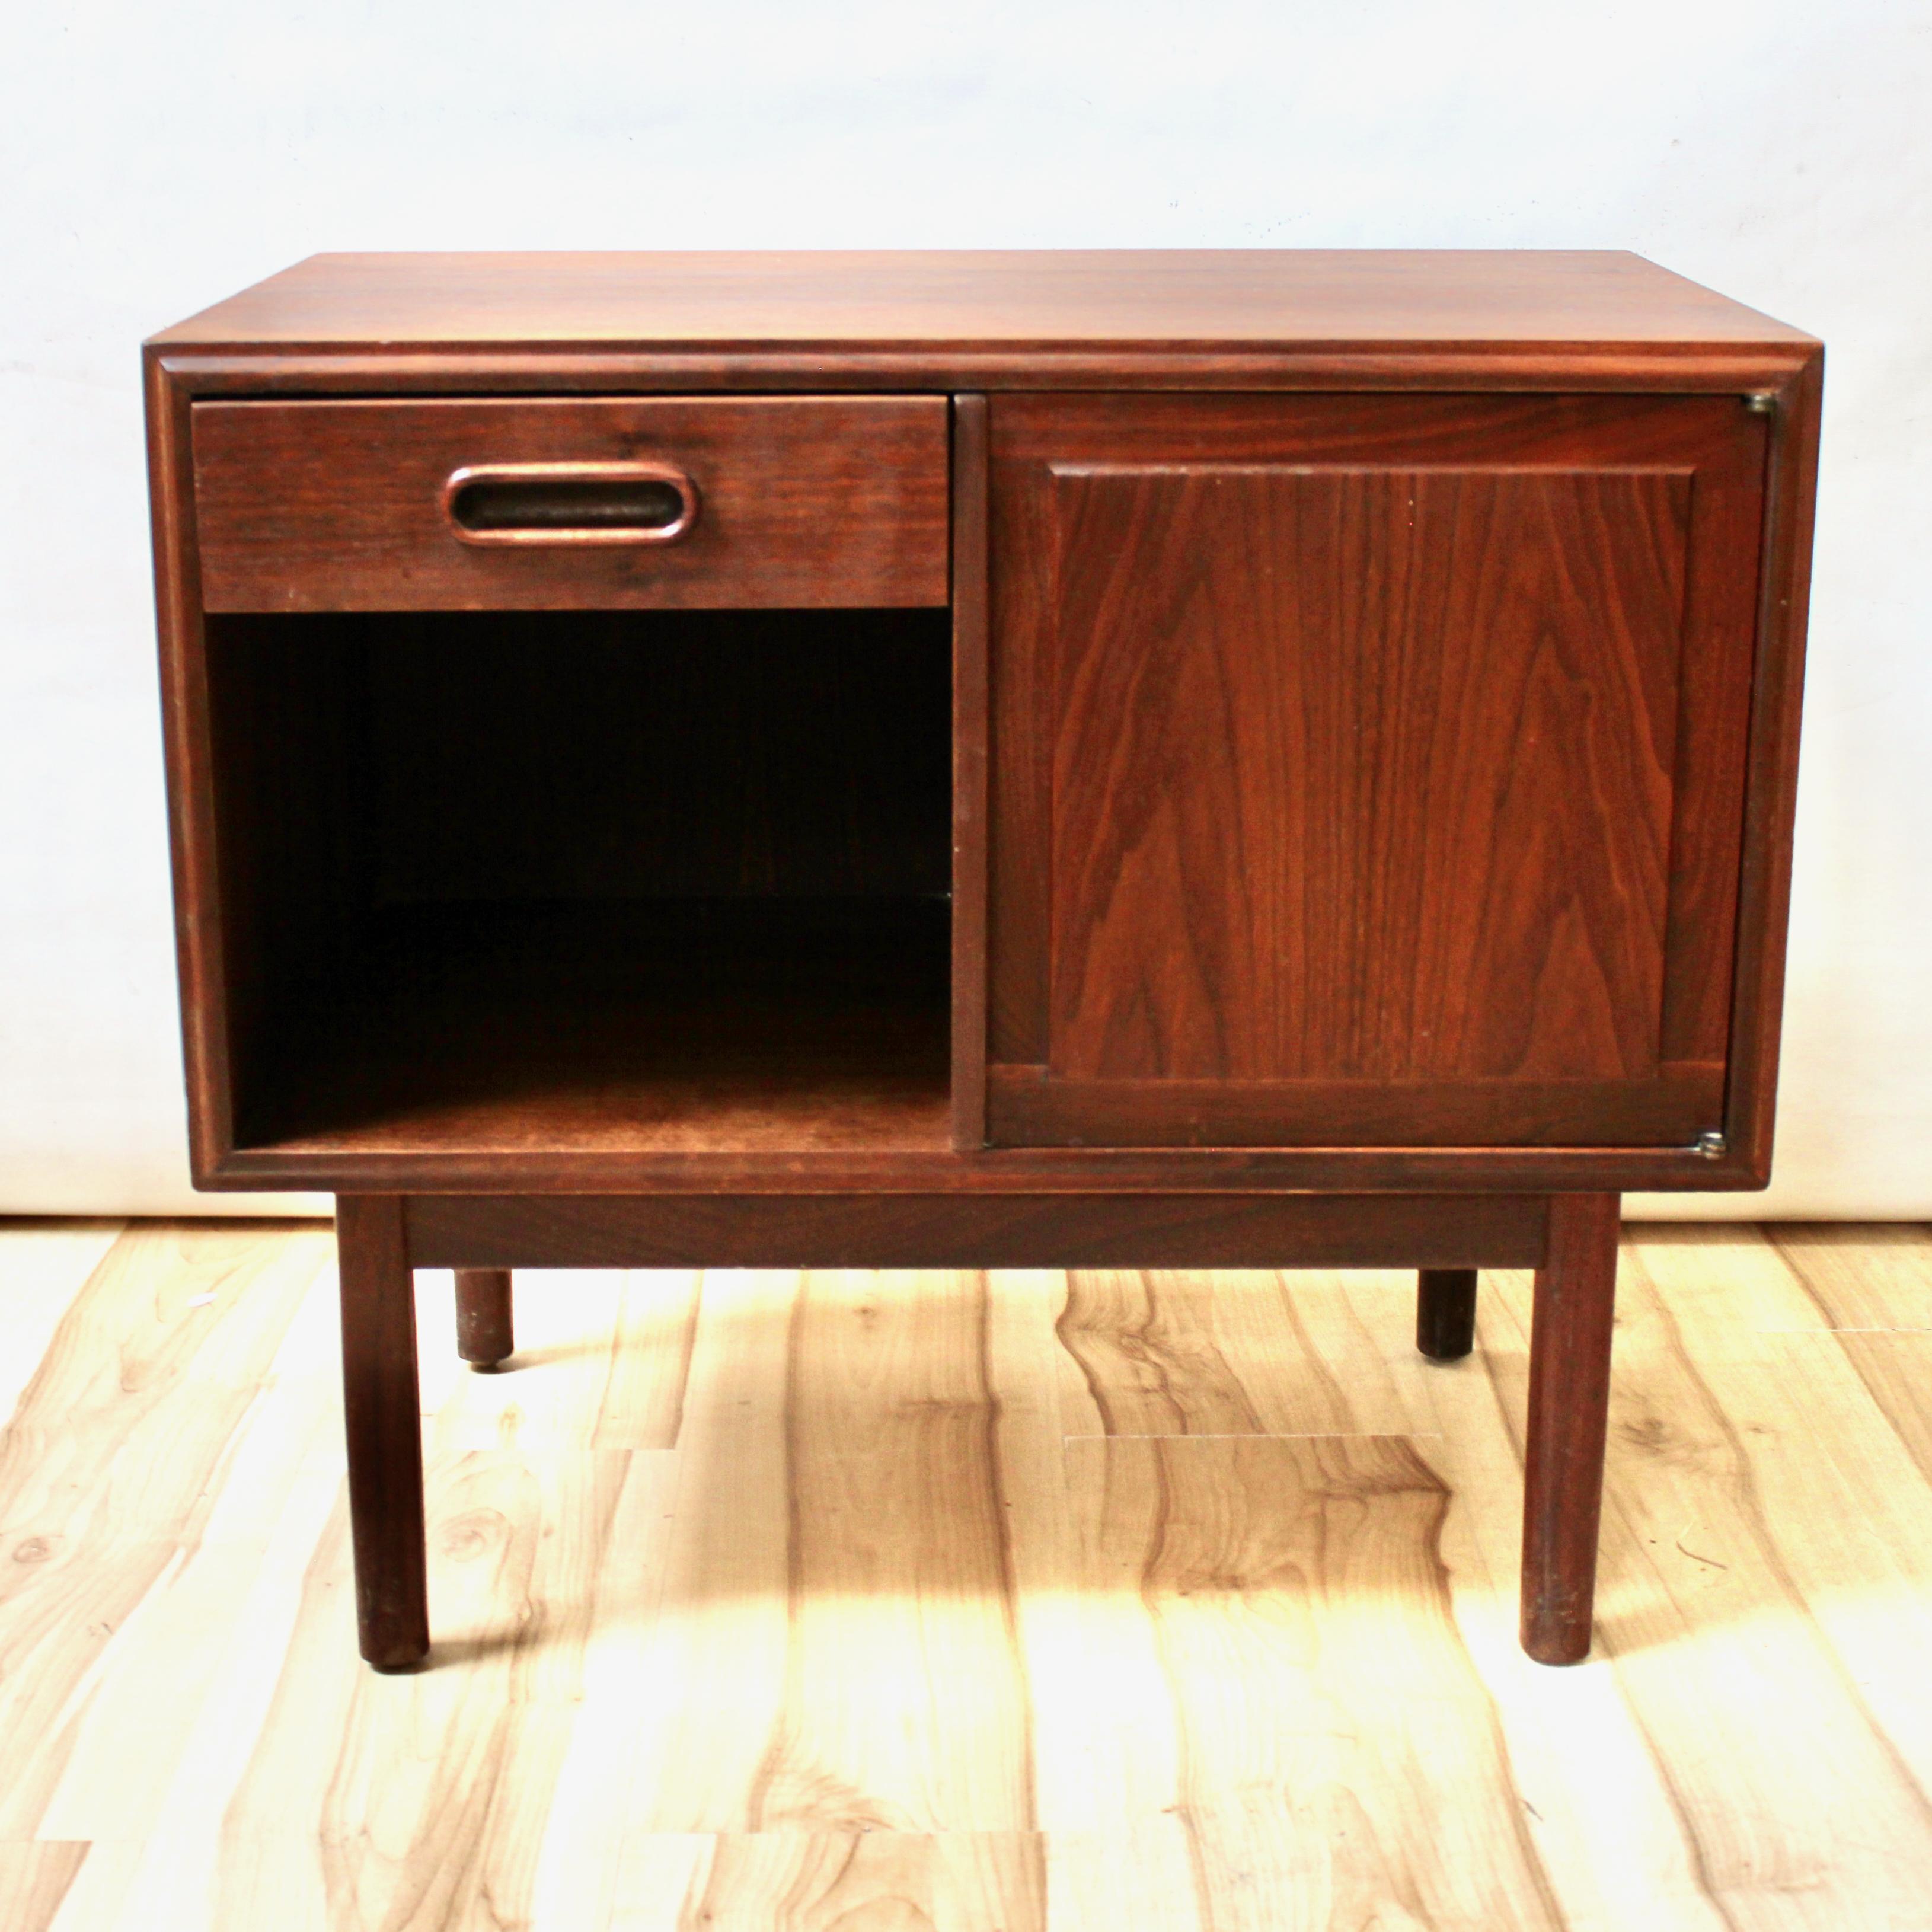 Mid-century modern walnut nightstand or small cabinet by Jack Cartwright for Founders Furniture. The nightstand has one drawer, and a cabinet section with a magnet closure. In excellent condition.

Width: 26 in / Depth: 16 in / Height: 23 in.